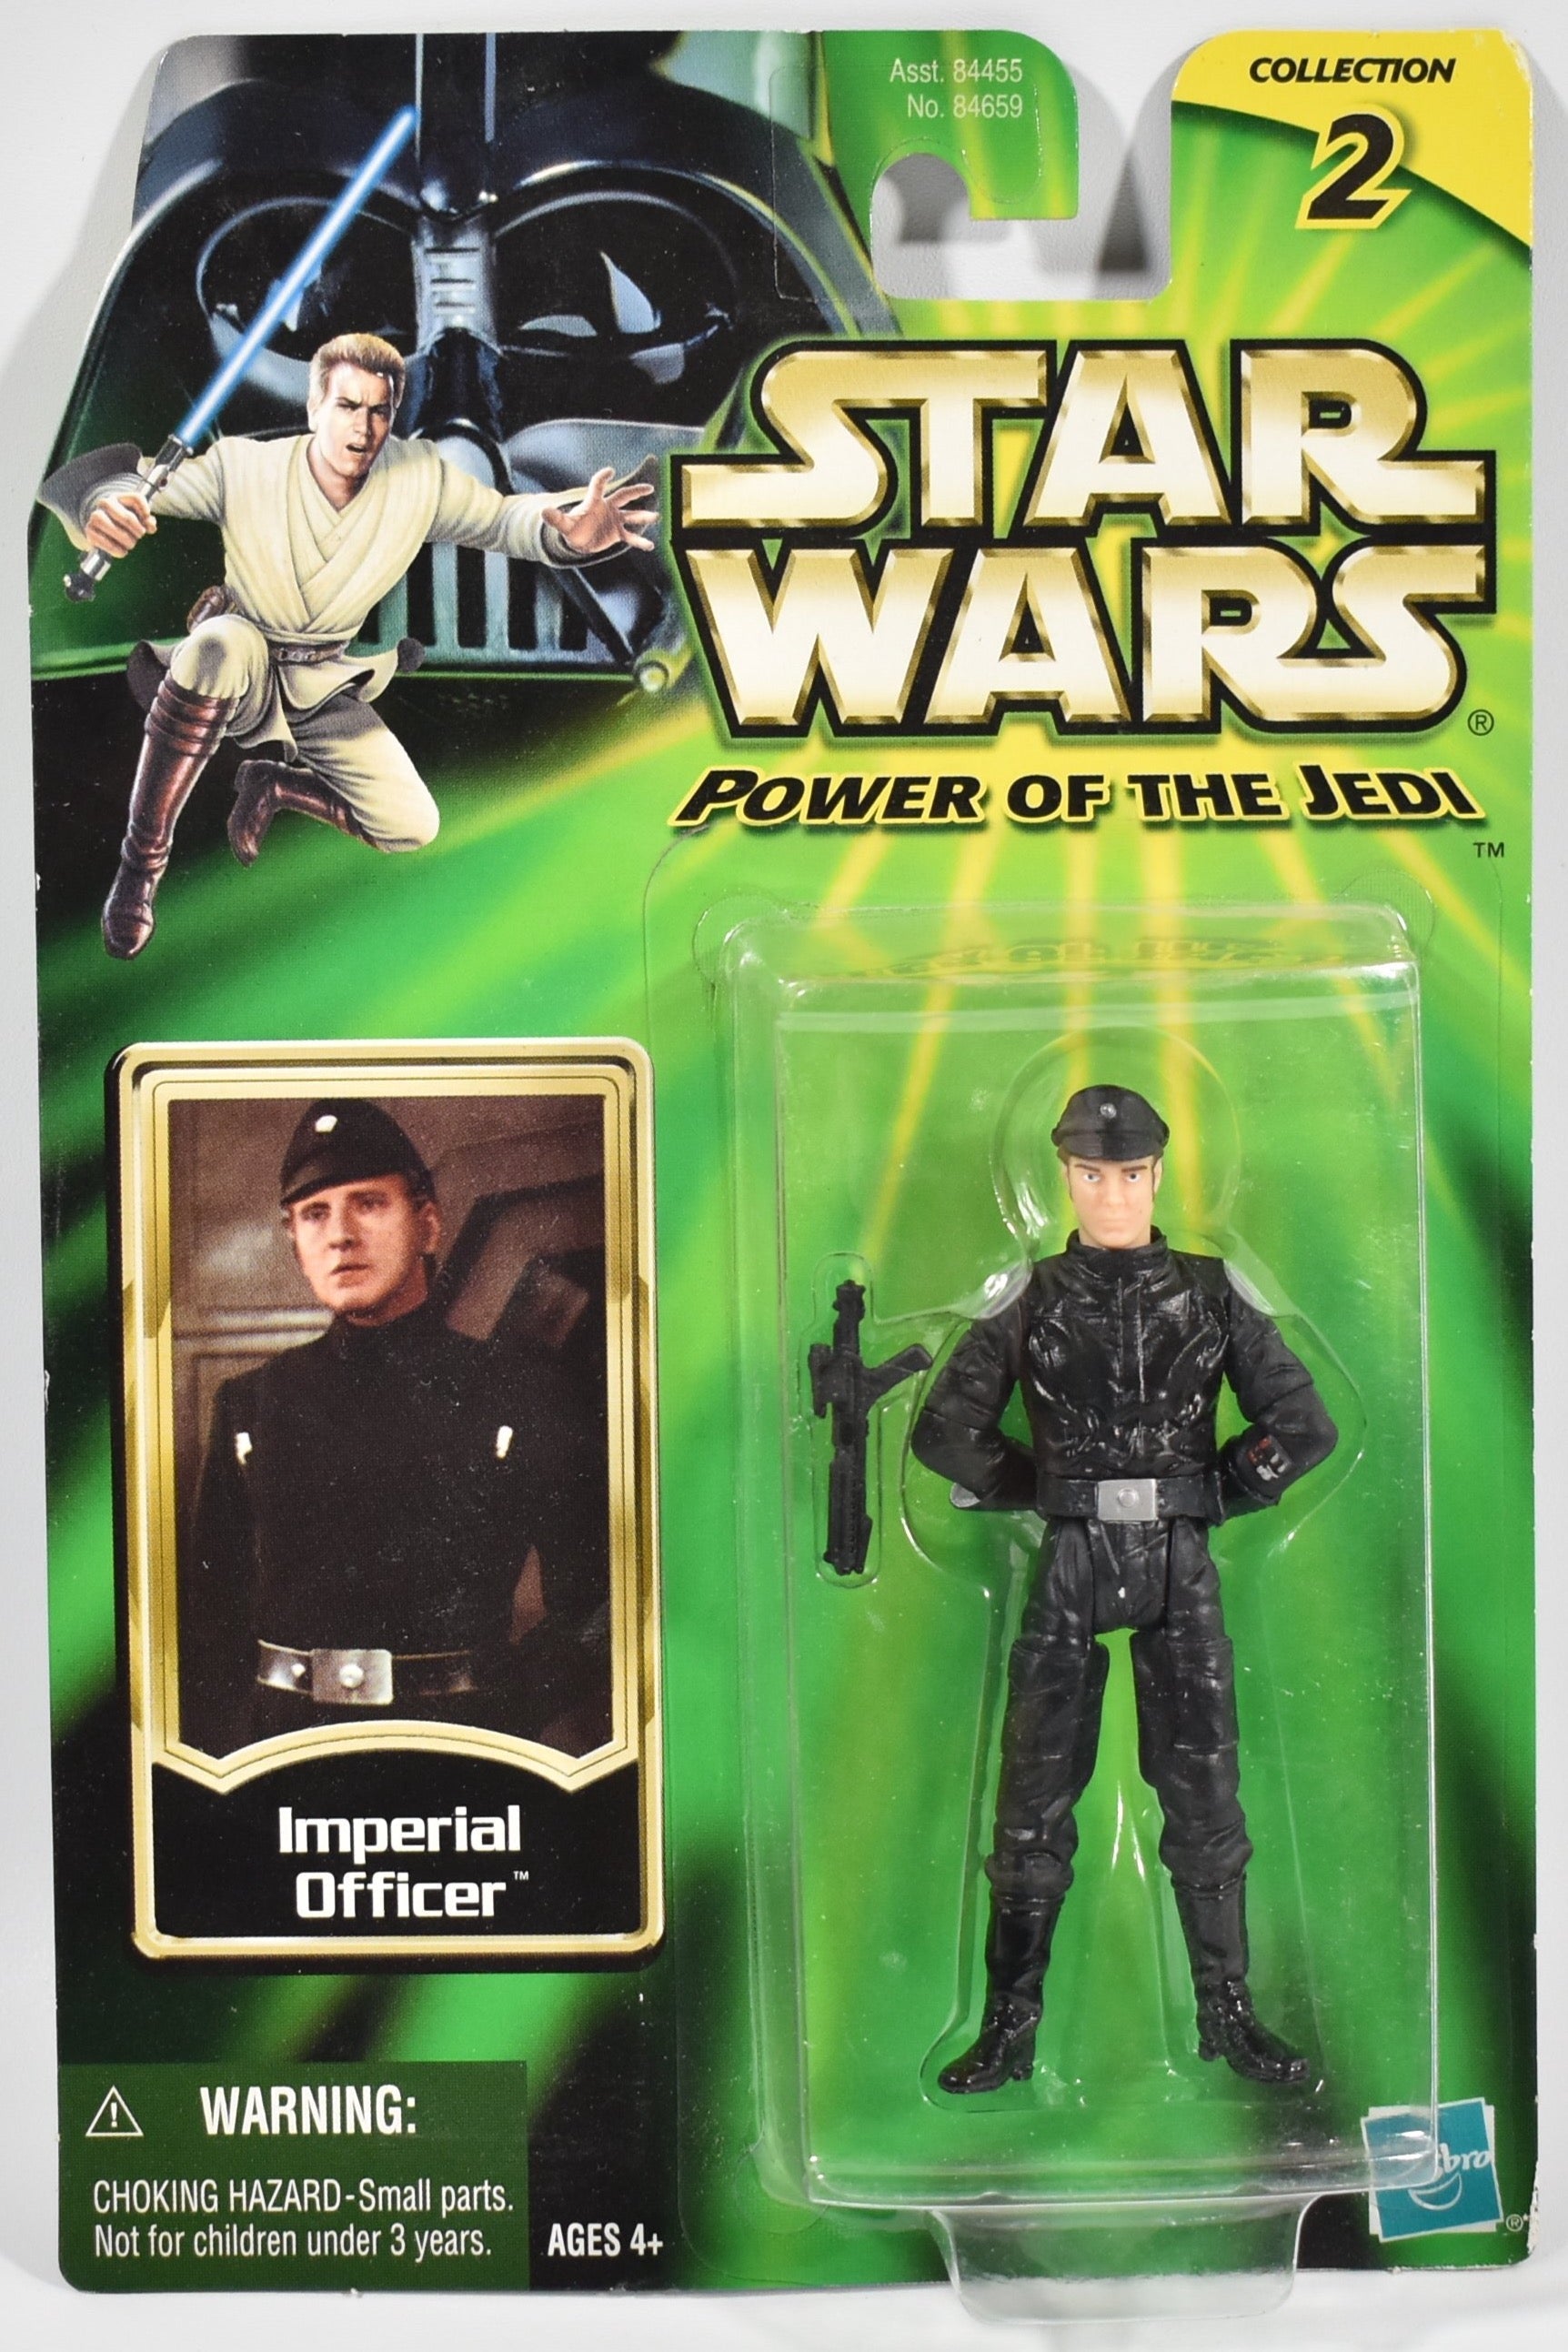 Star Wars Power of the Jedi Action Figure Imperial Officer